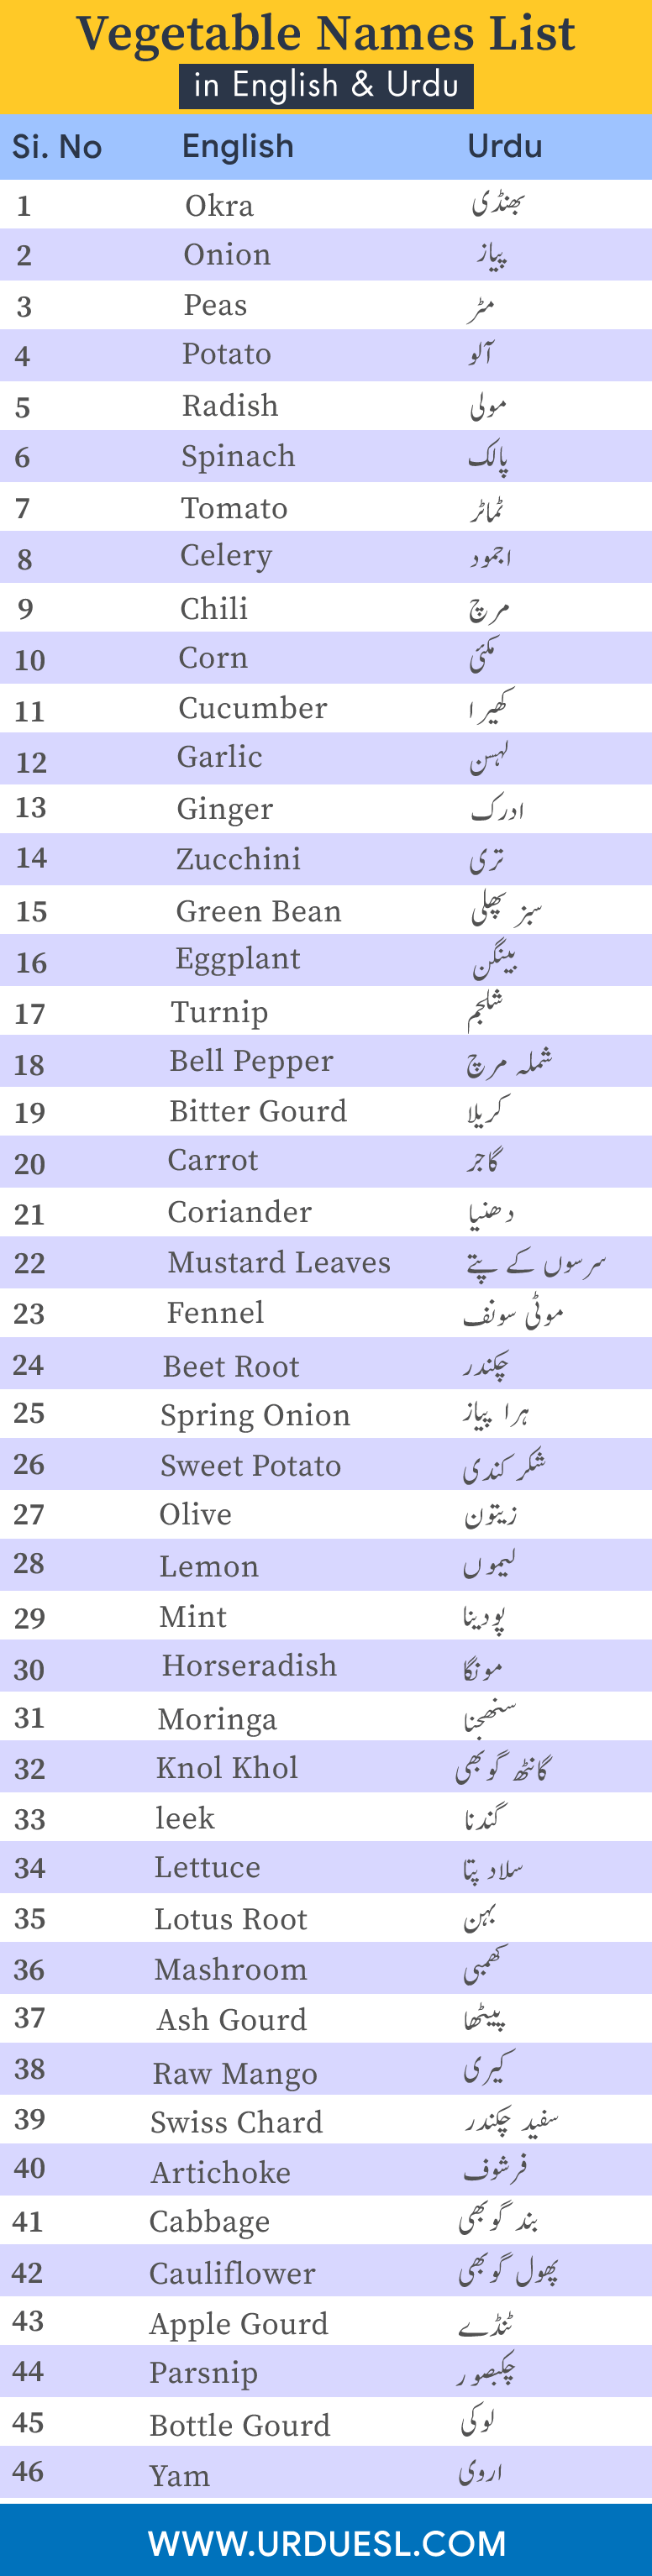 Vegetable Names in English and Urdu with Pictures - Download Pdf